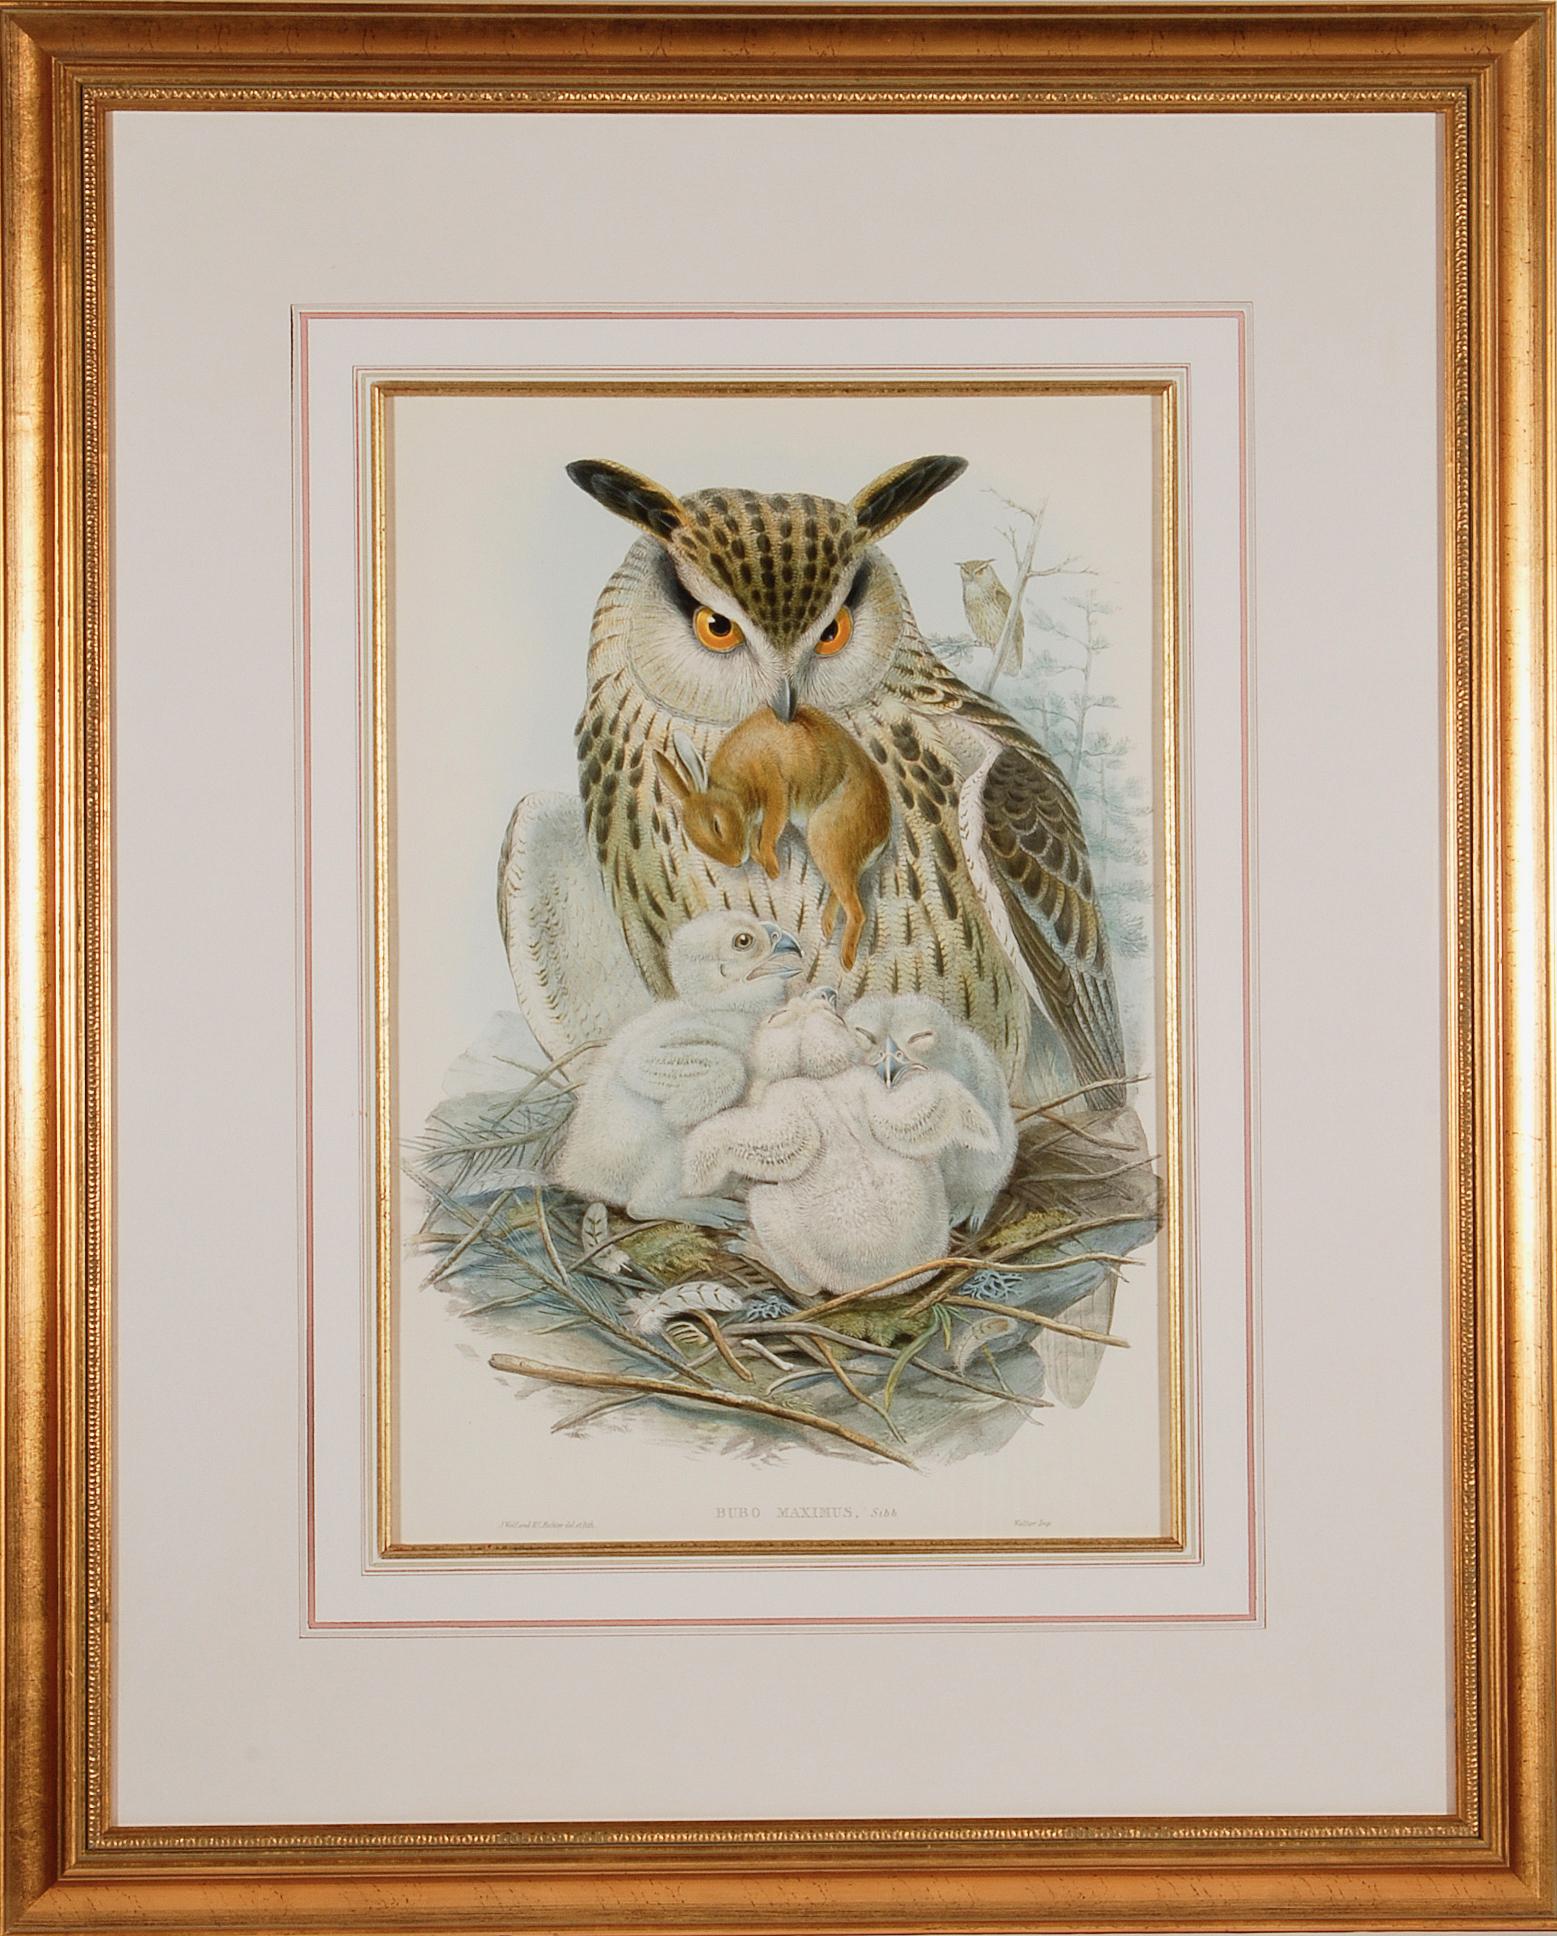 John Gould and Henry Constantine Richter Landscape Print - Eagle or Horned Owl: A Framed Original 19th C. Hand-colored Lithograph by Gould